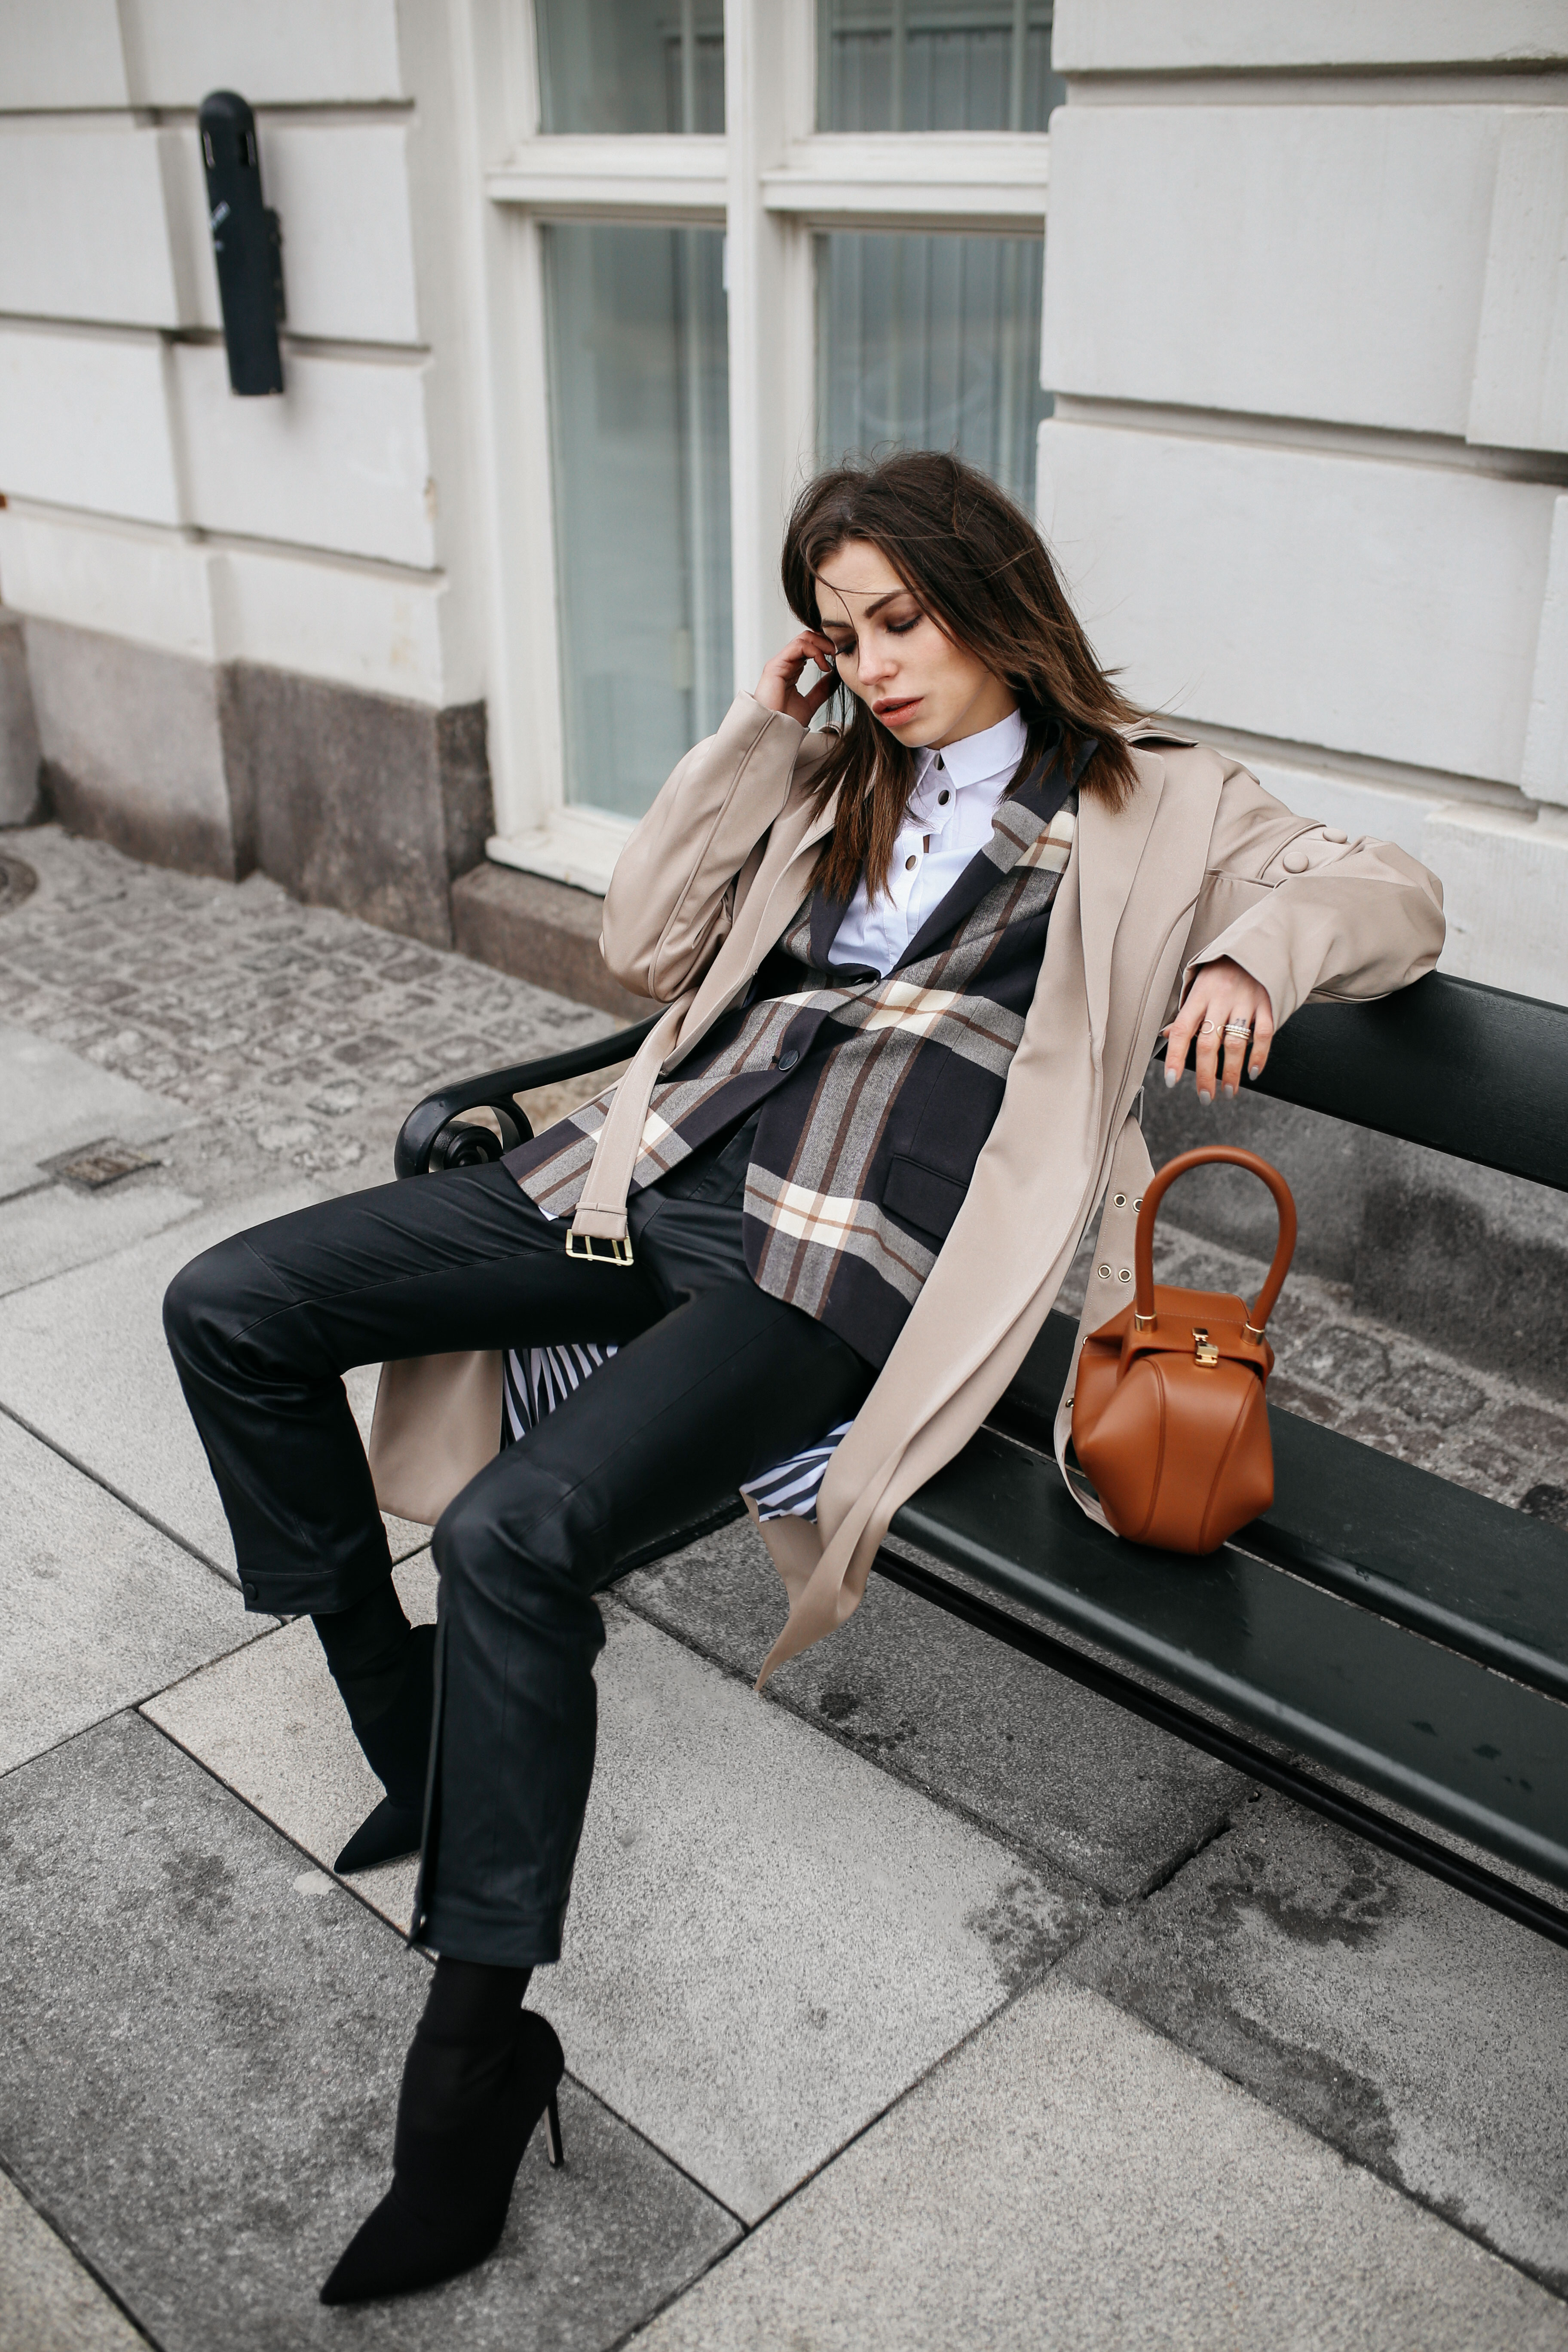 Street Style in Kopenhagen | Brands: Gestuz, By Malene Birger, Gabriela Hearst | Style: AW18 office, sexy, casual, business, edgy, checked, sophisticated | Fashion Blogger Editorial